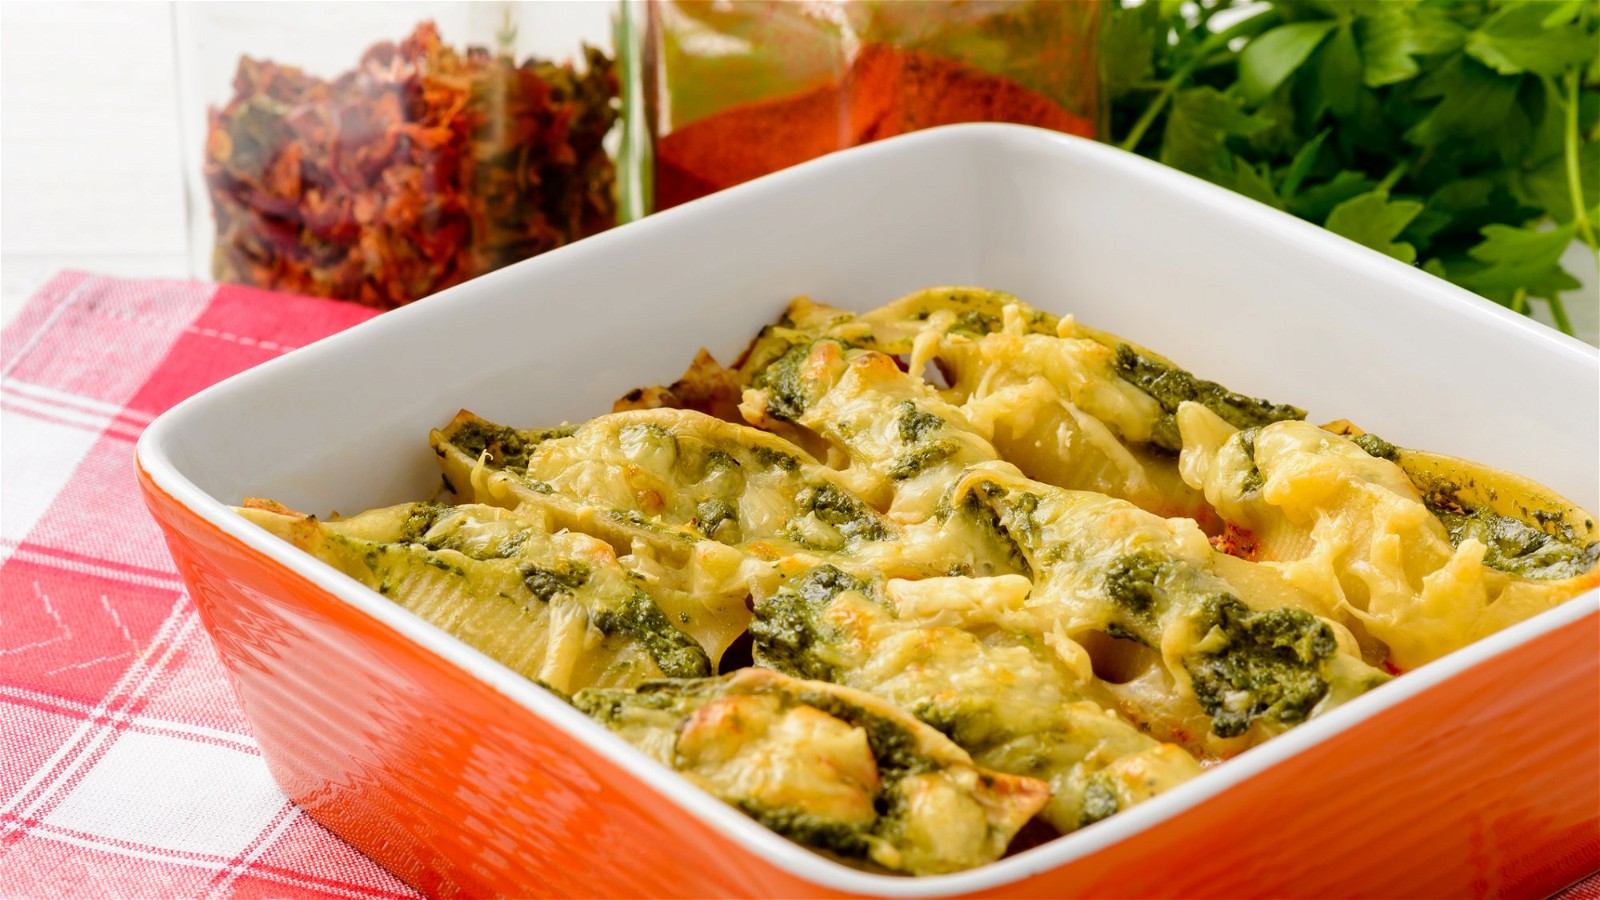 Image of Cheesy Spinach Stuffed Shells